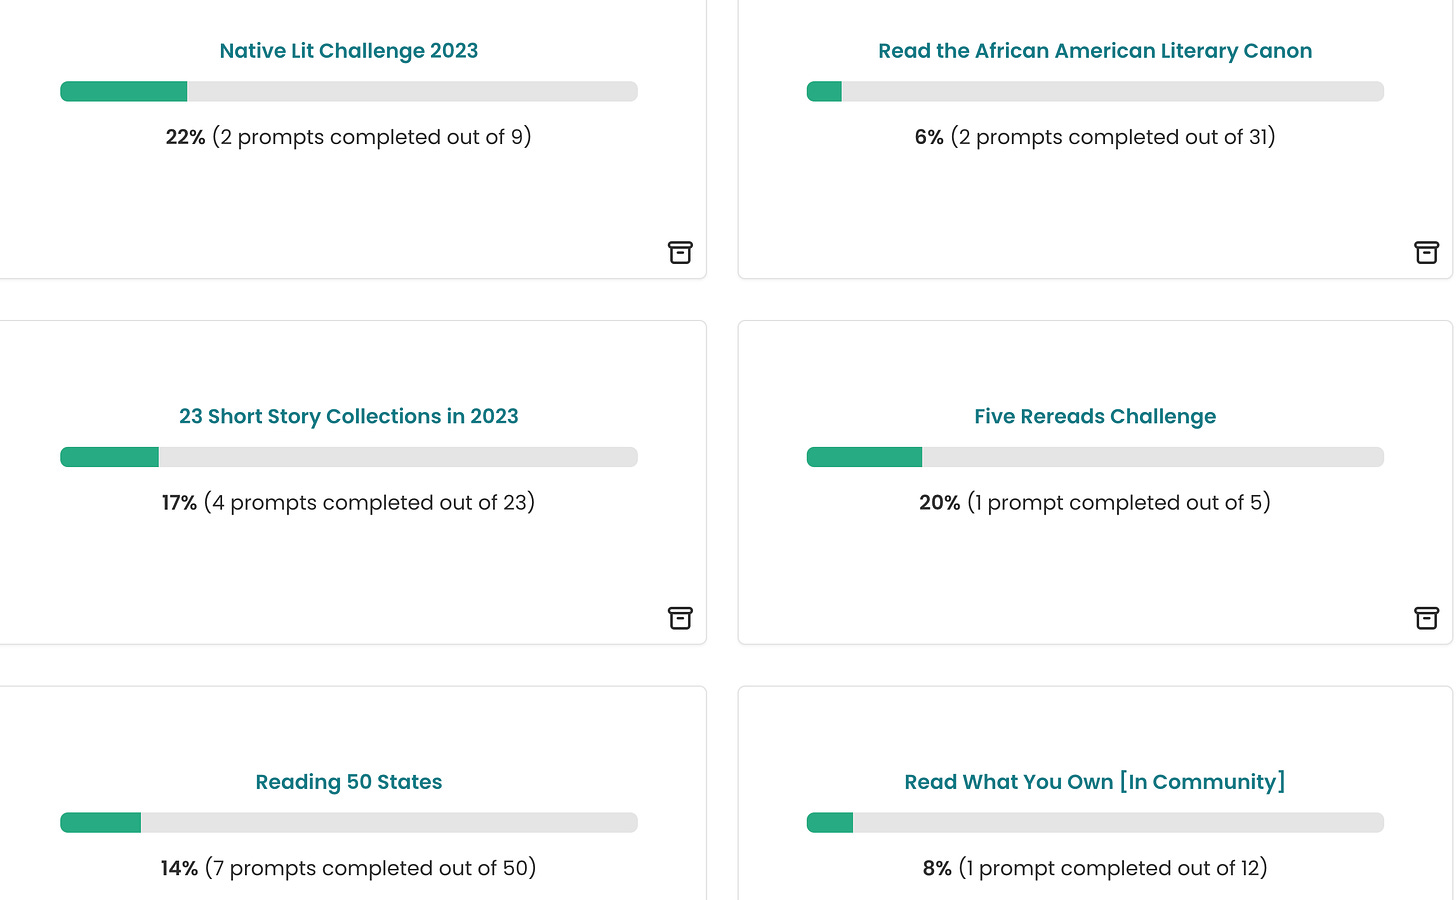 Screenshot of my Storygraph Reading Challenges page, showing 6 challenges I’m participating in: Native Lit Challenge, Read the African American Literary Canon, 23 Short Story Collections, Five Rereads Challenge, Read 50 States, and Read What You Own in Community.